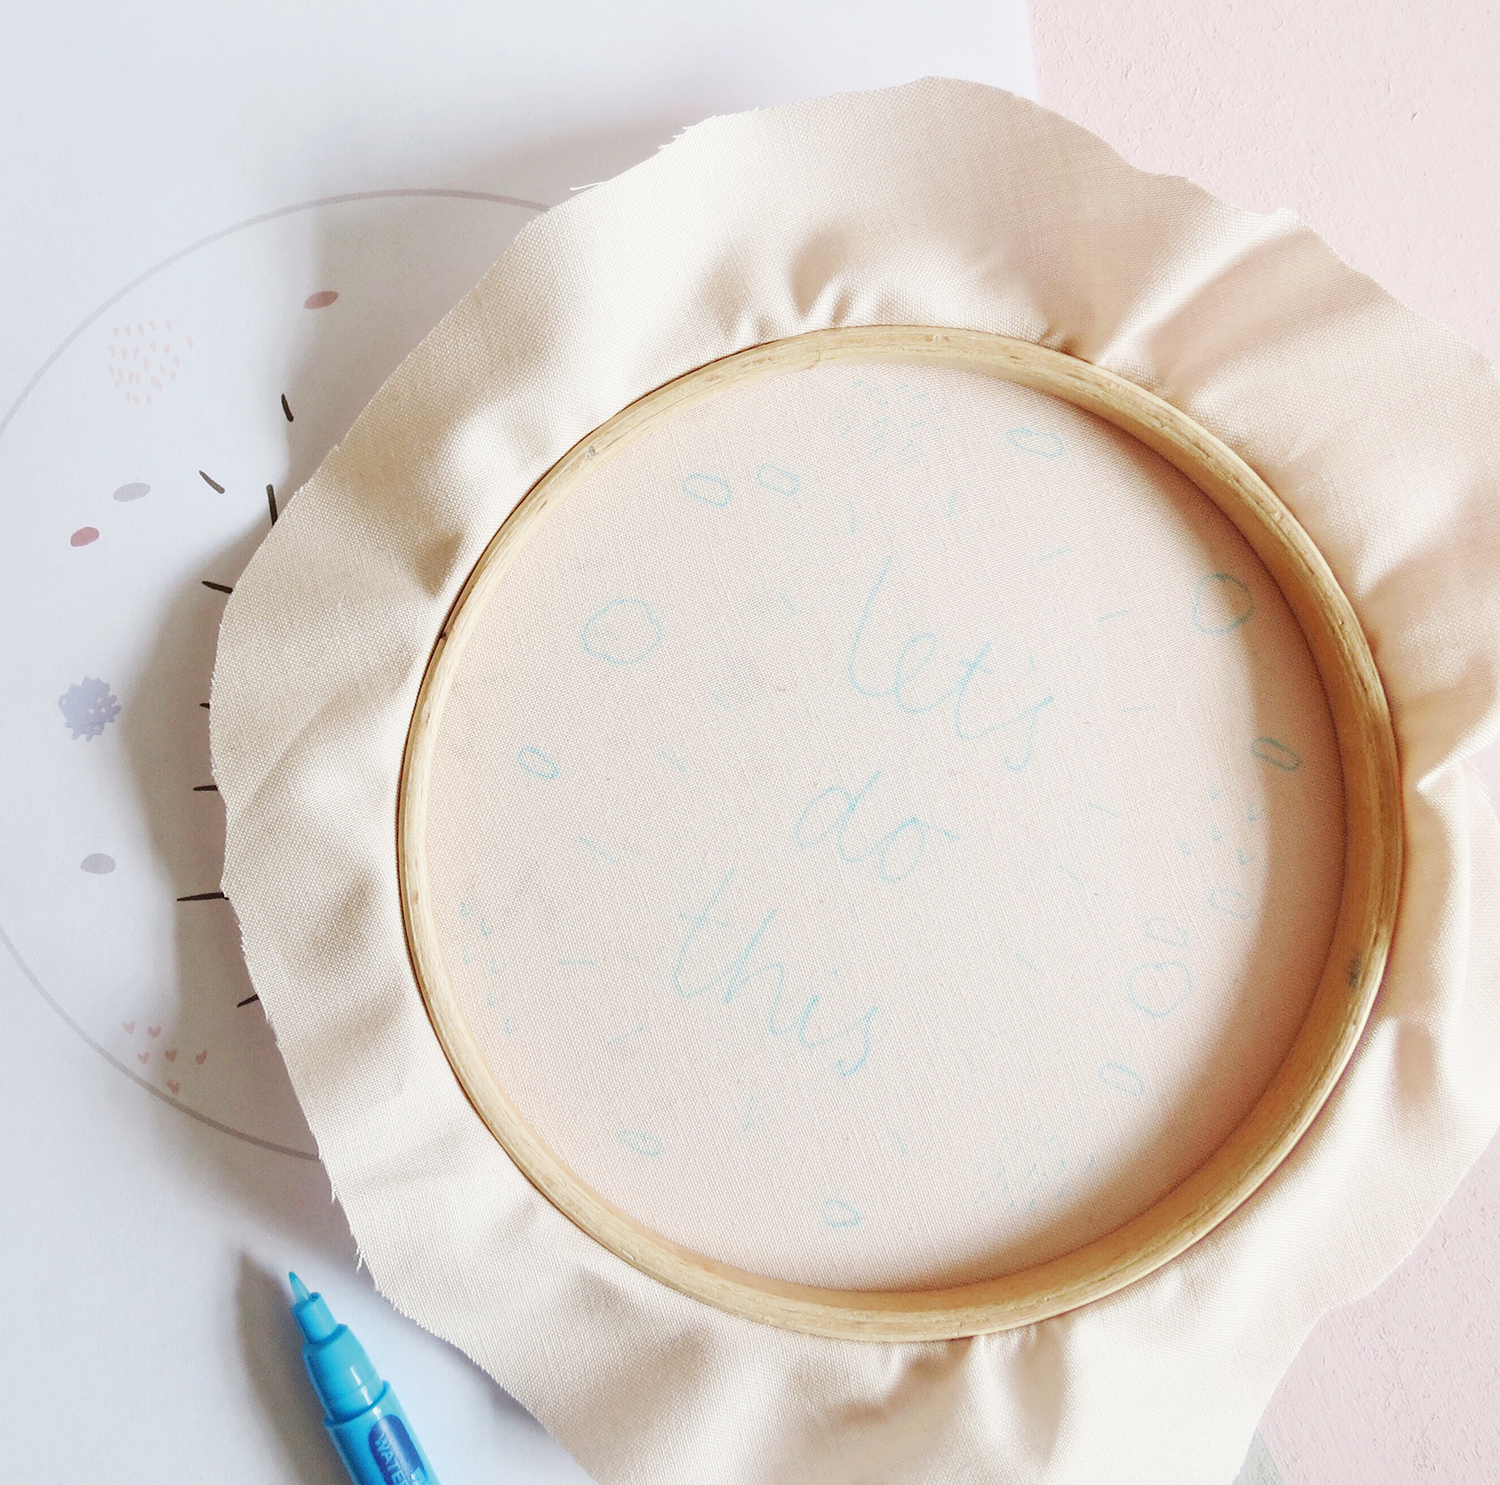 How to make a slogan embroidery hoop step 1